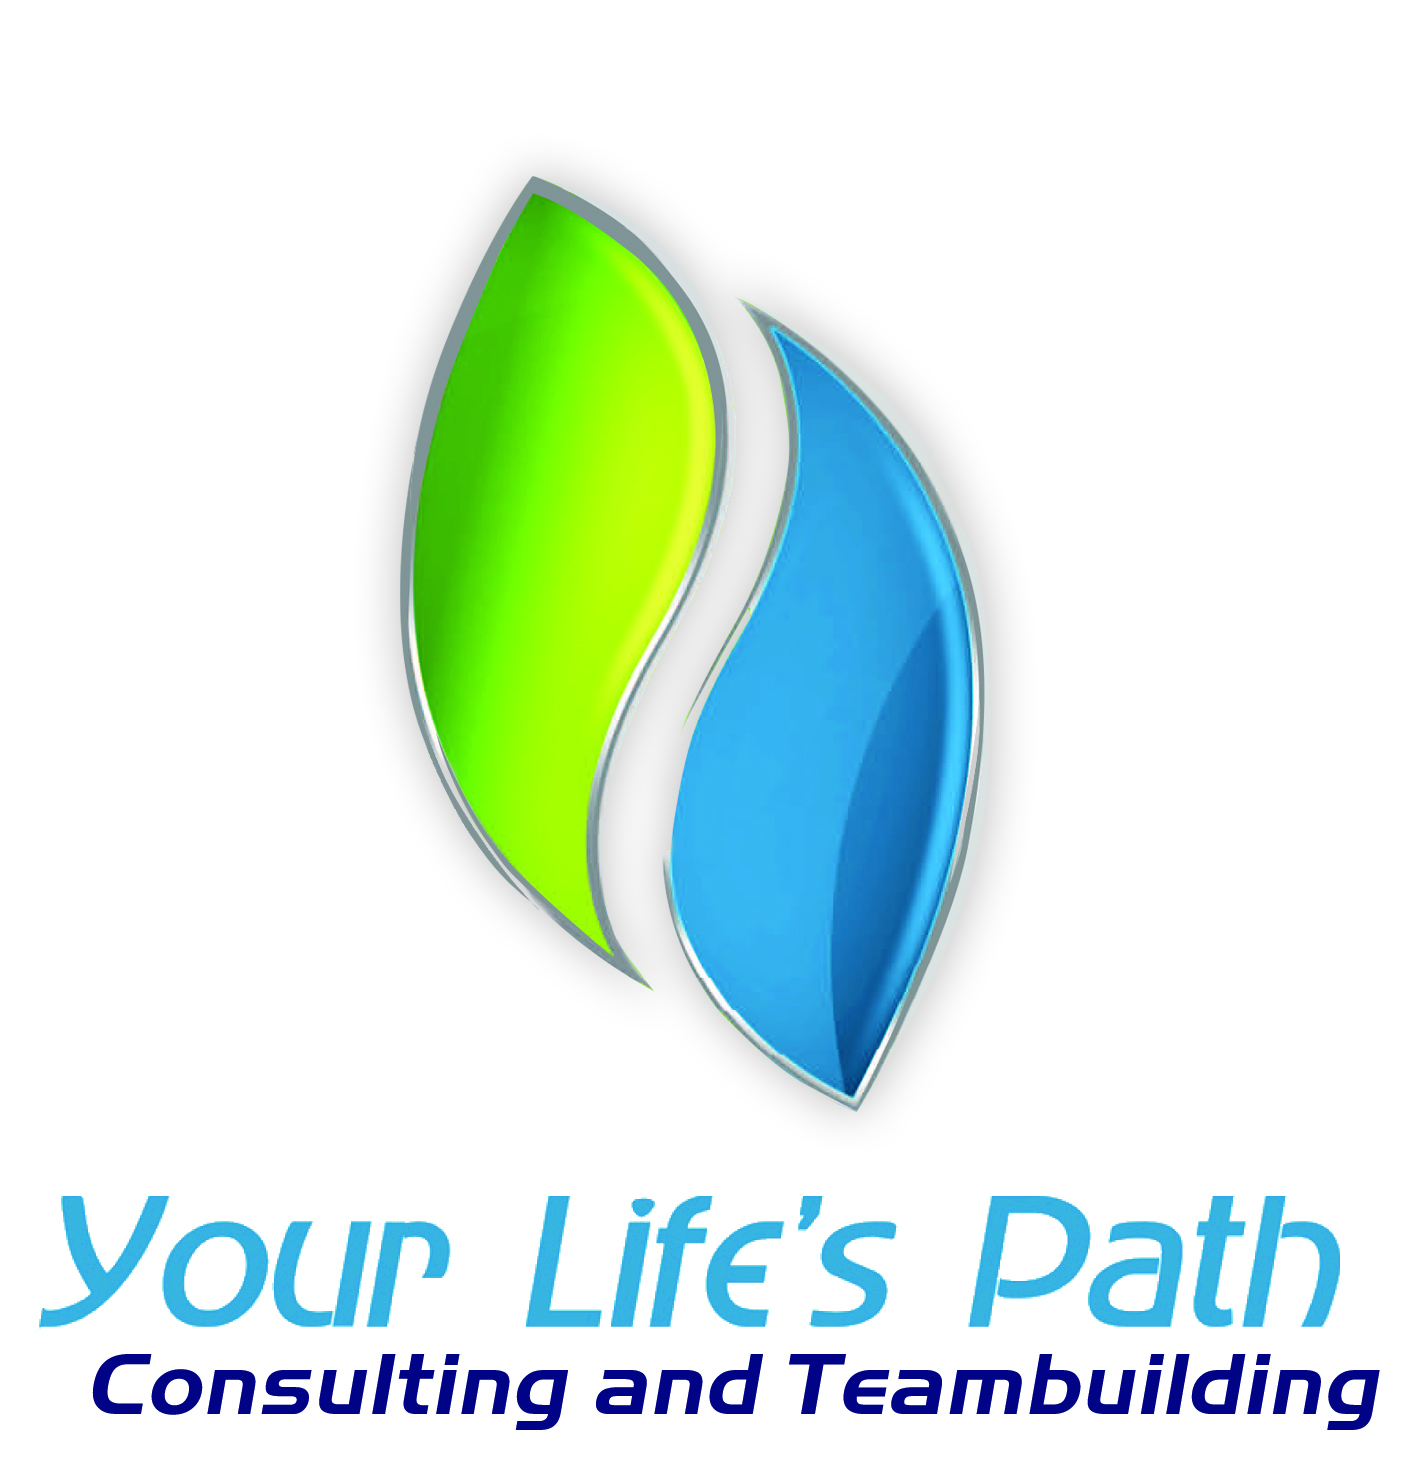 http://pressreleaseheadlines.com/wp-content/Cimy_User_Extra_Fields/Your Lifes Path/YLP_Logo.jpg